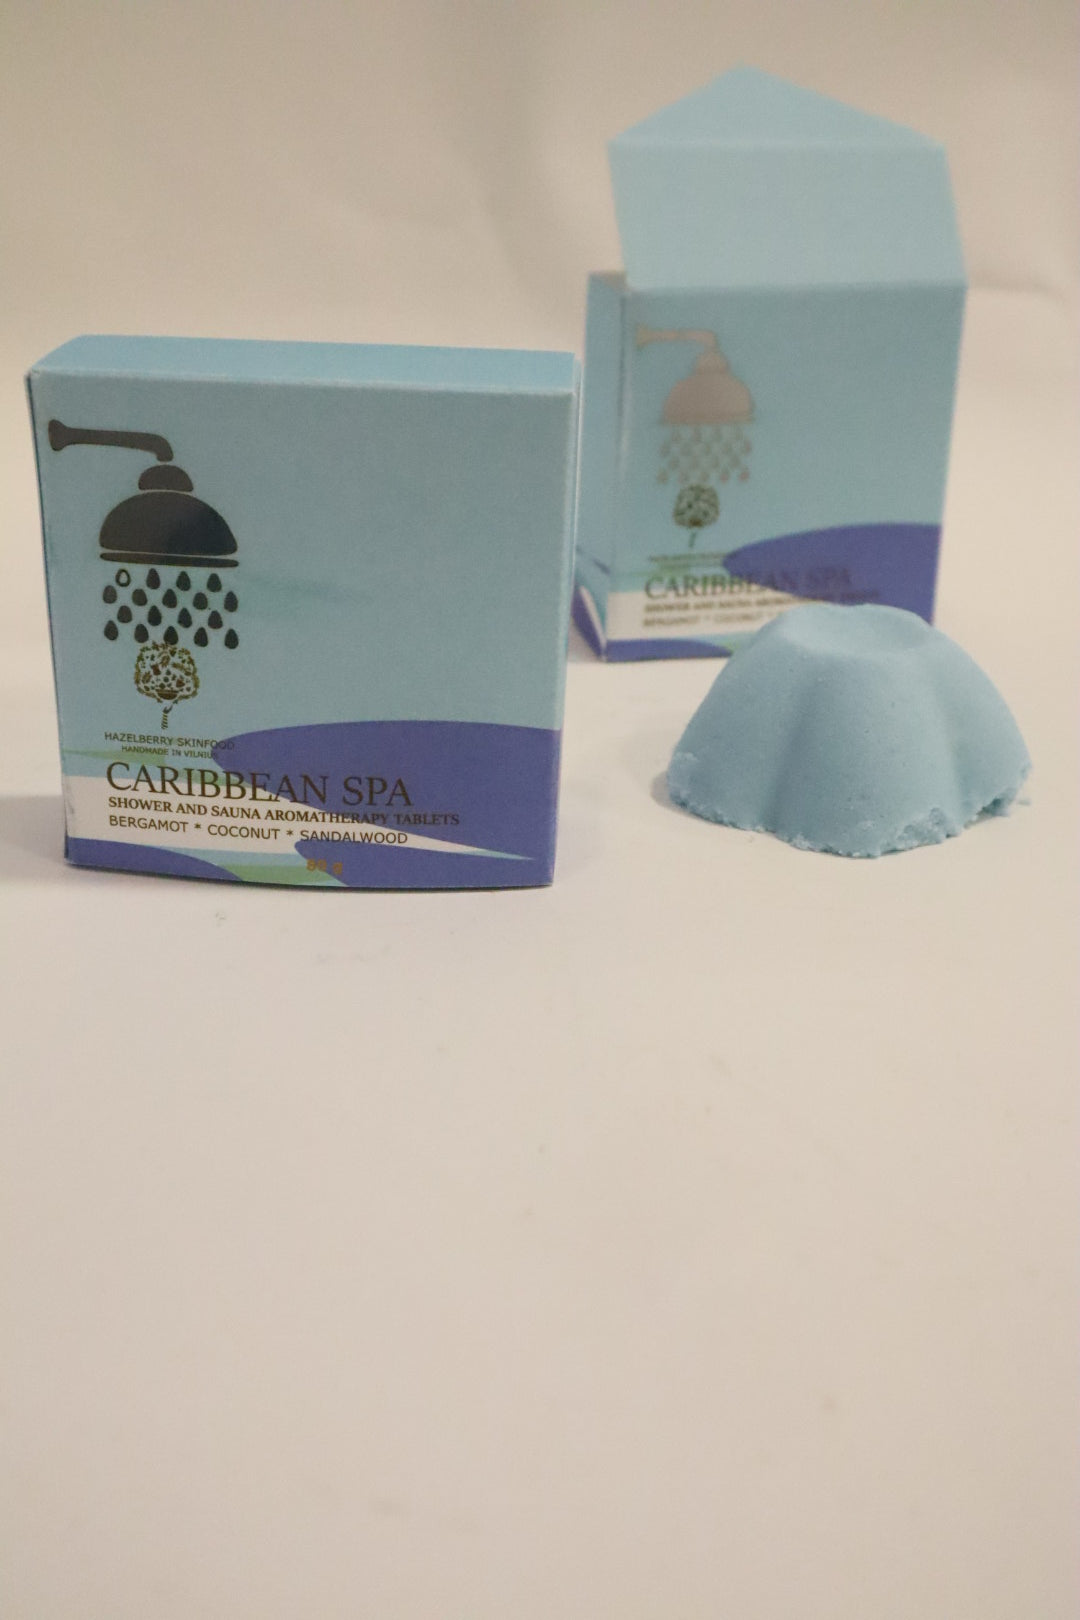 Caribbean Spa Shower and Sauna Aromatherapy Tablet